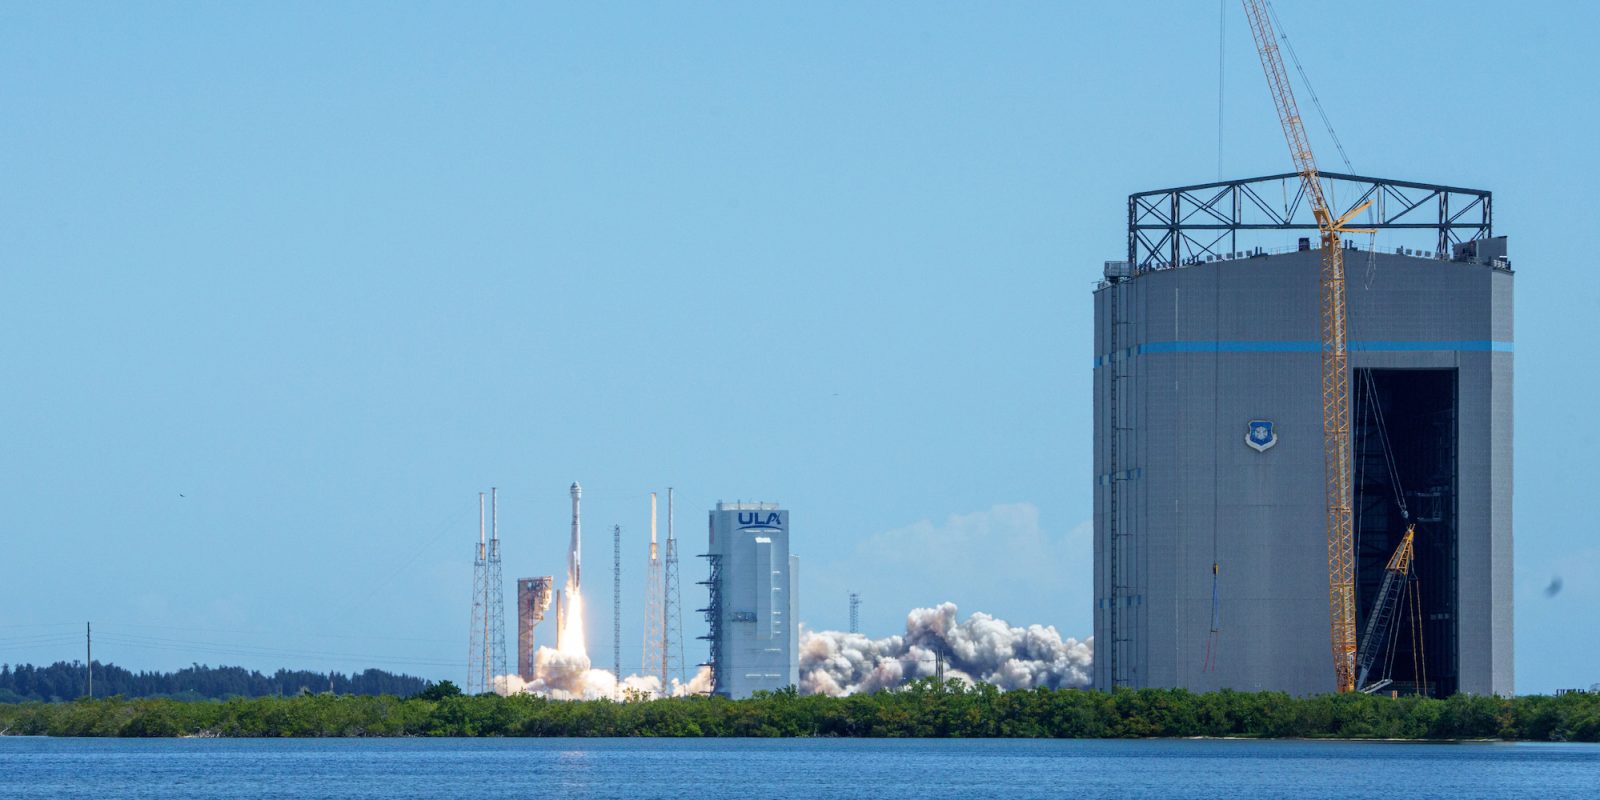 An Atlas V rocket lifts off from SLC-41 at Cape Canaveral Space Force Station carrying NASA astronauts Butch Wilmore and Suni Williams on Boeing Starliner's CFT mission.